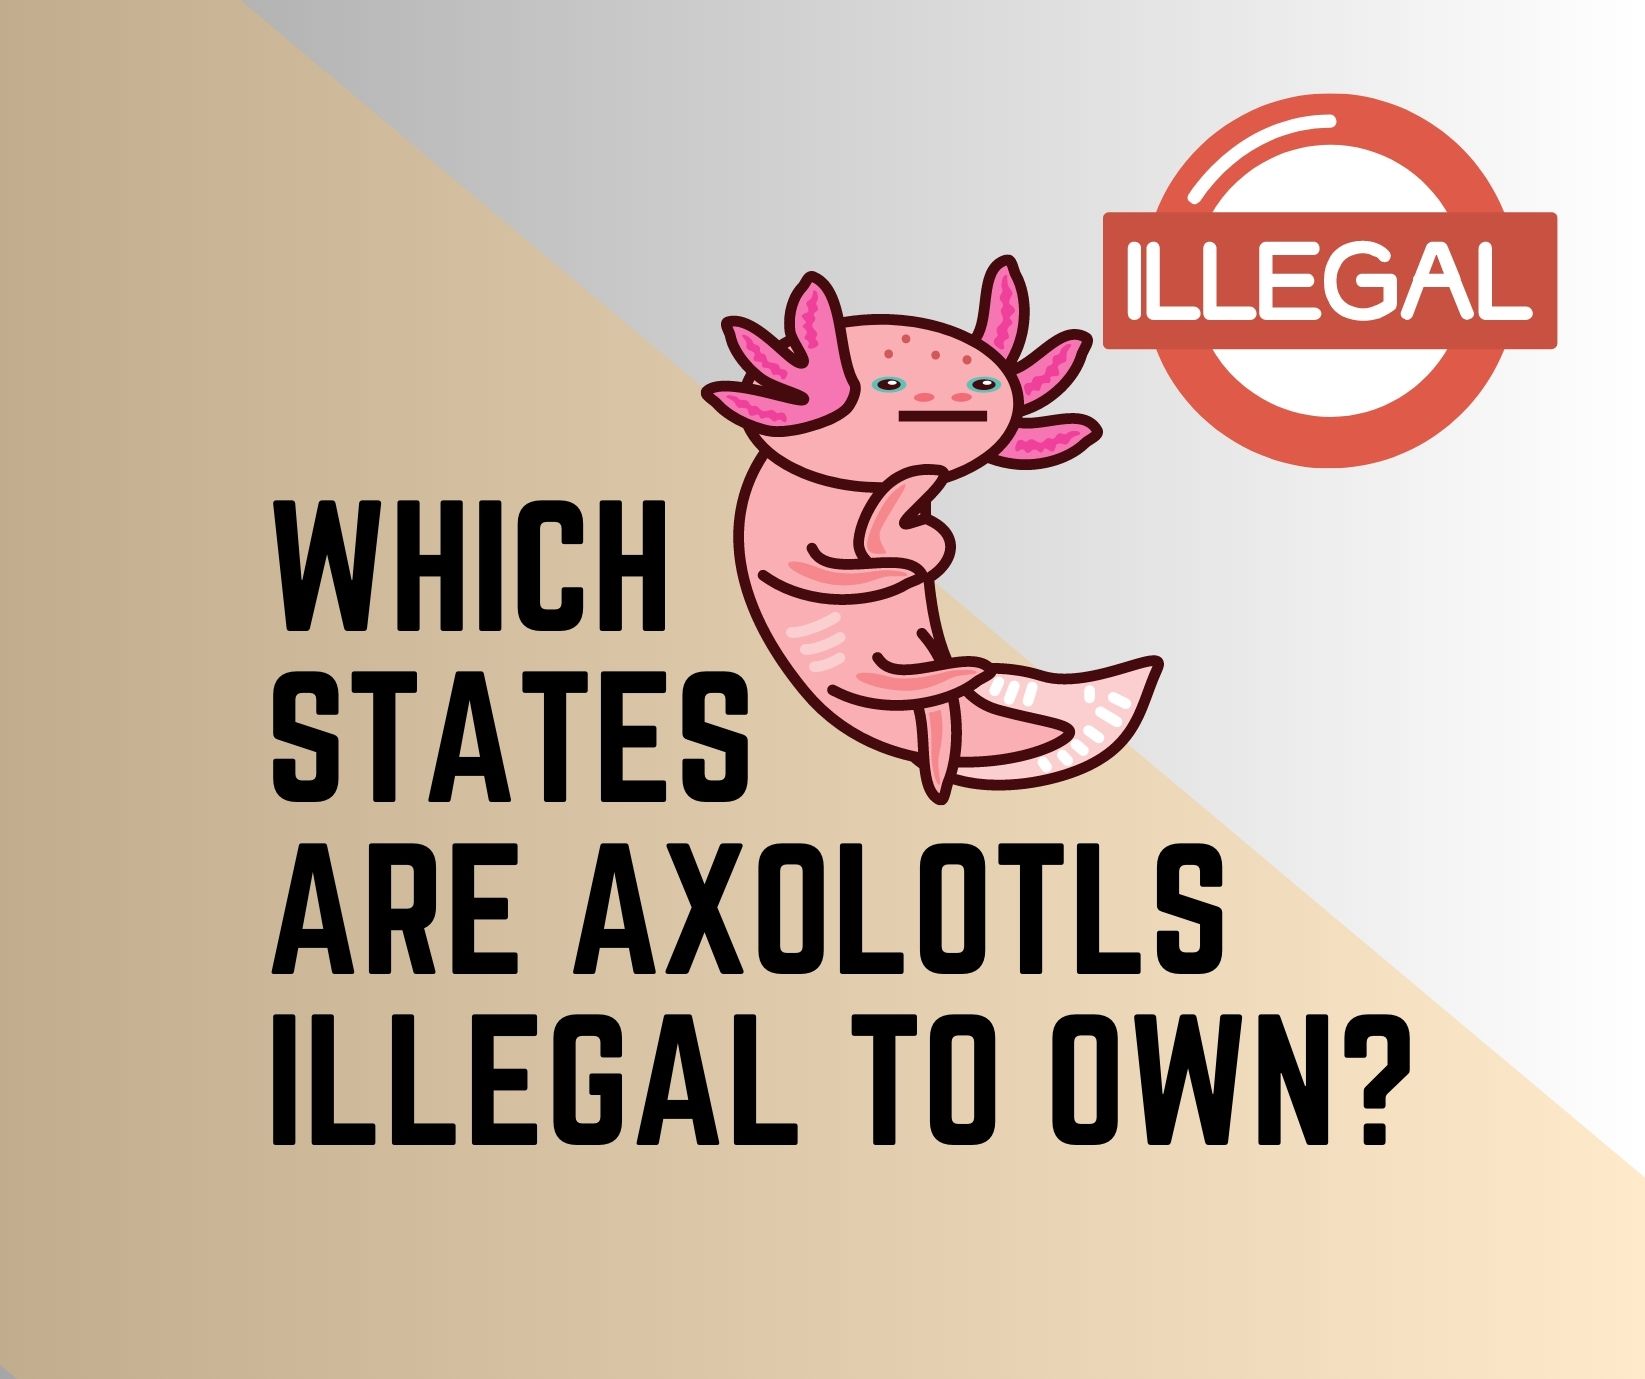 What States Are Axolotls Illegal In